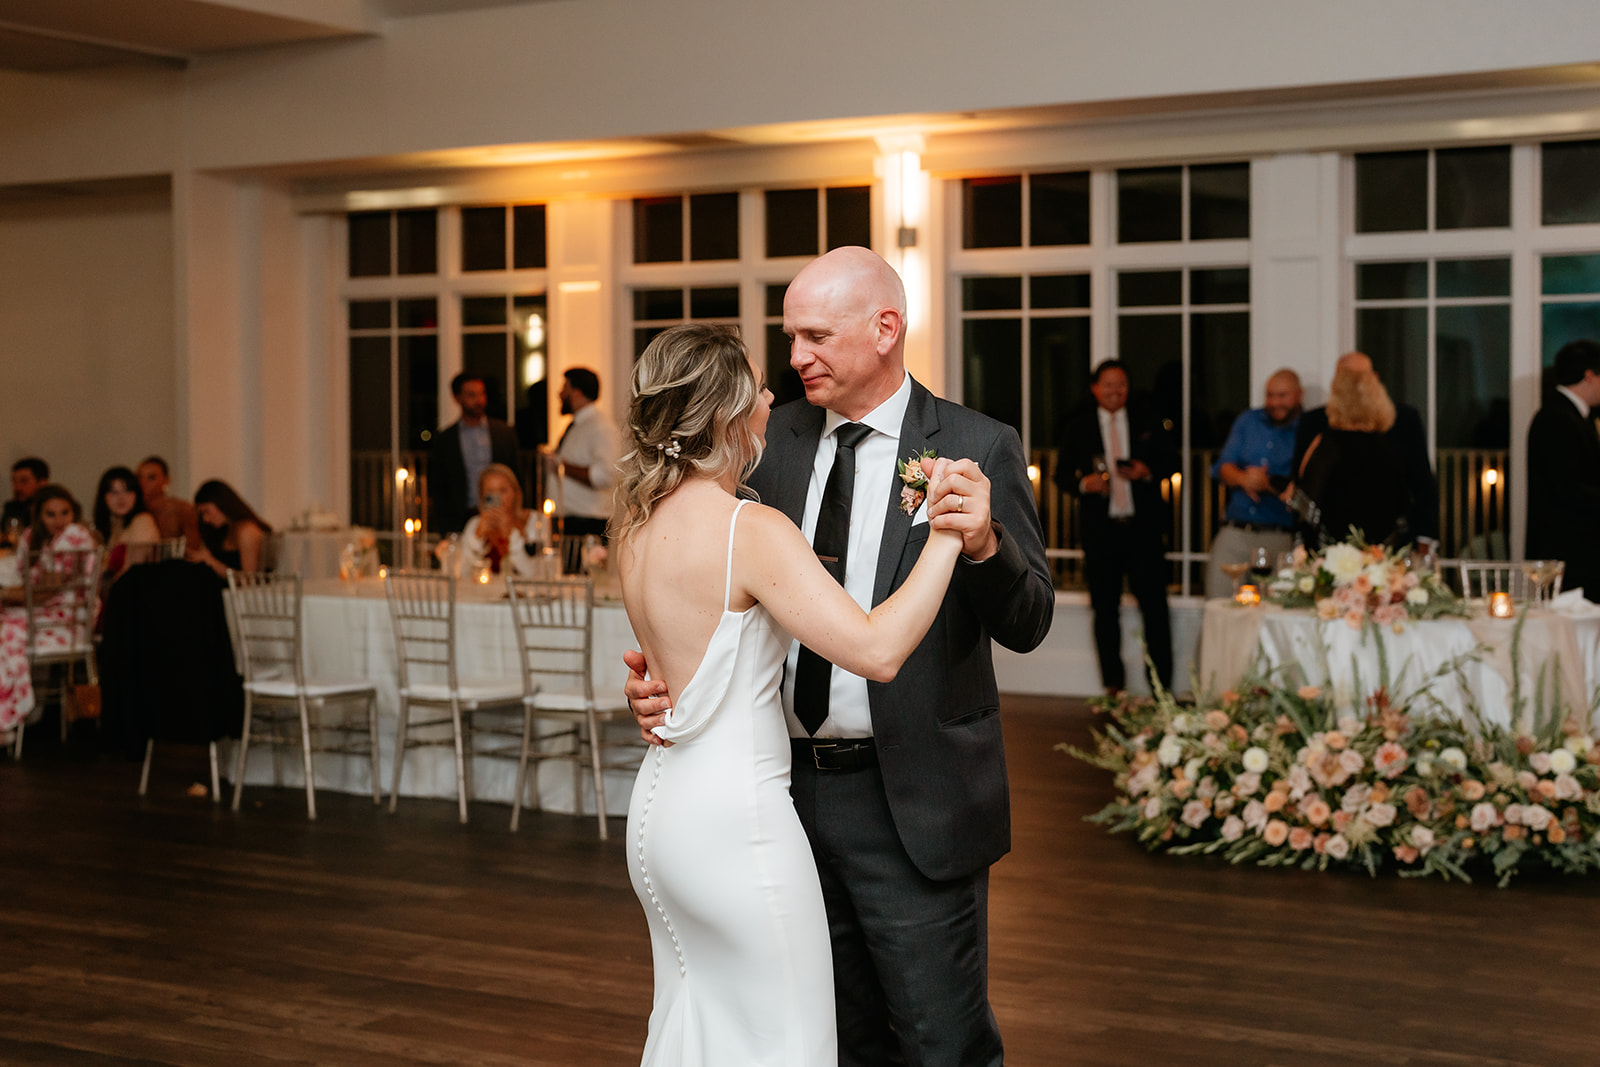 A joyful bride and dad dancing together at their wedding reception at Granite Links celebrating their special day with love and happiness.